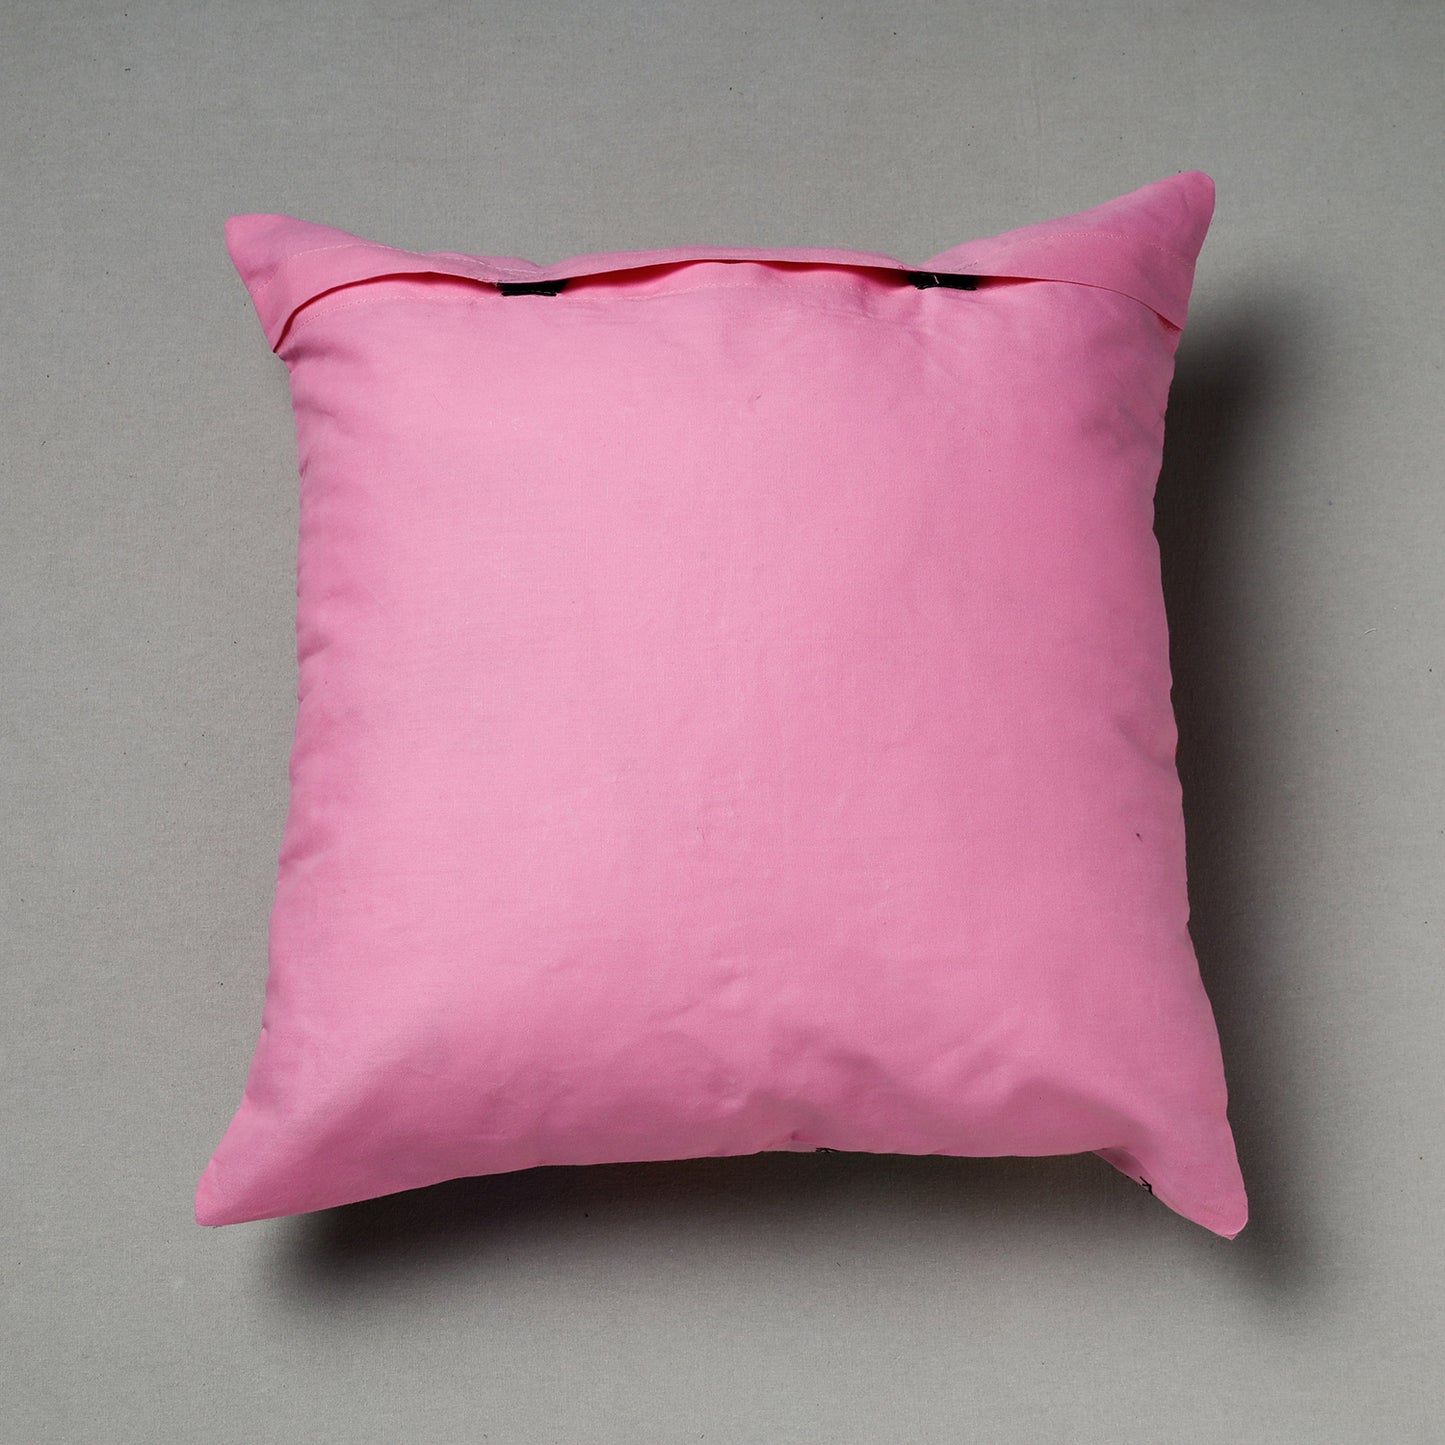 Pink - Pipli Applique Work Cotton Cushion Cover (16 x 16 in) Assorted